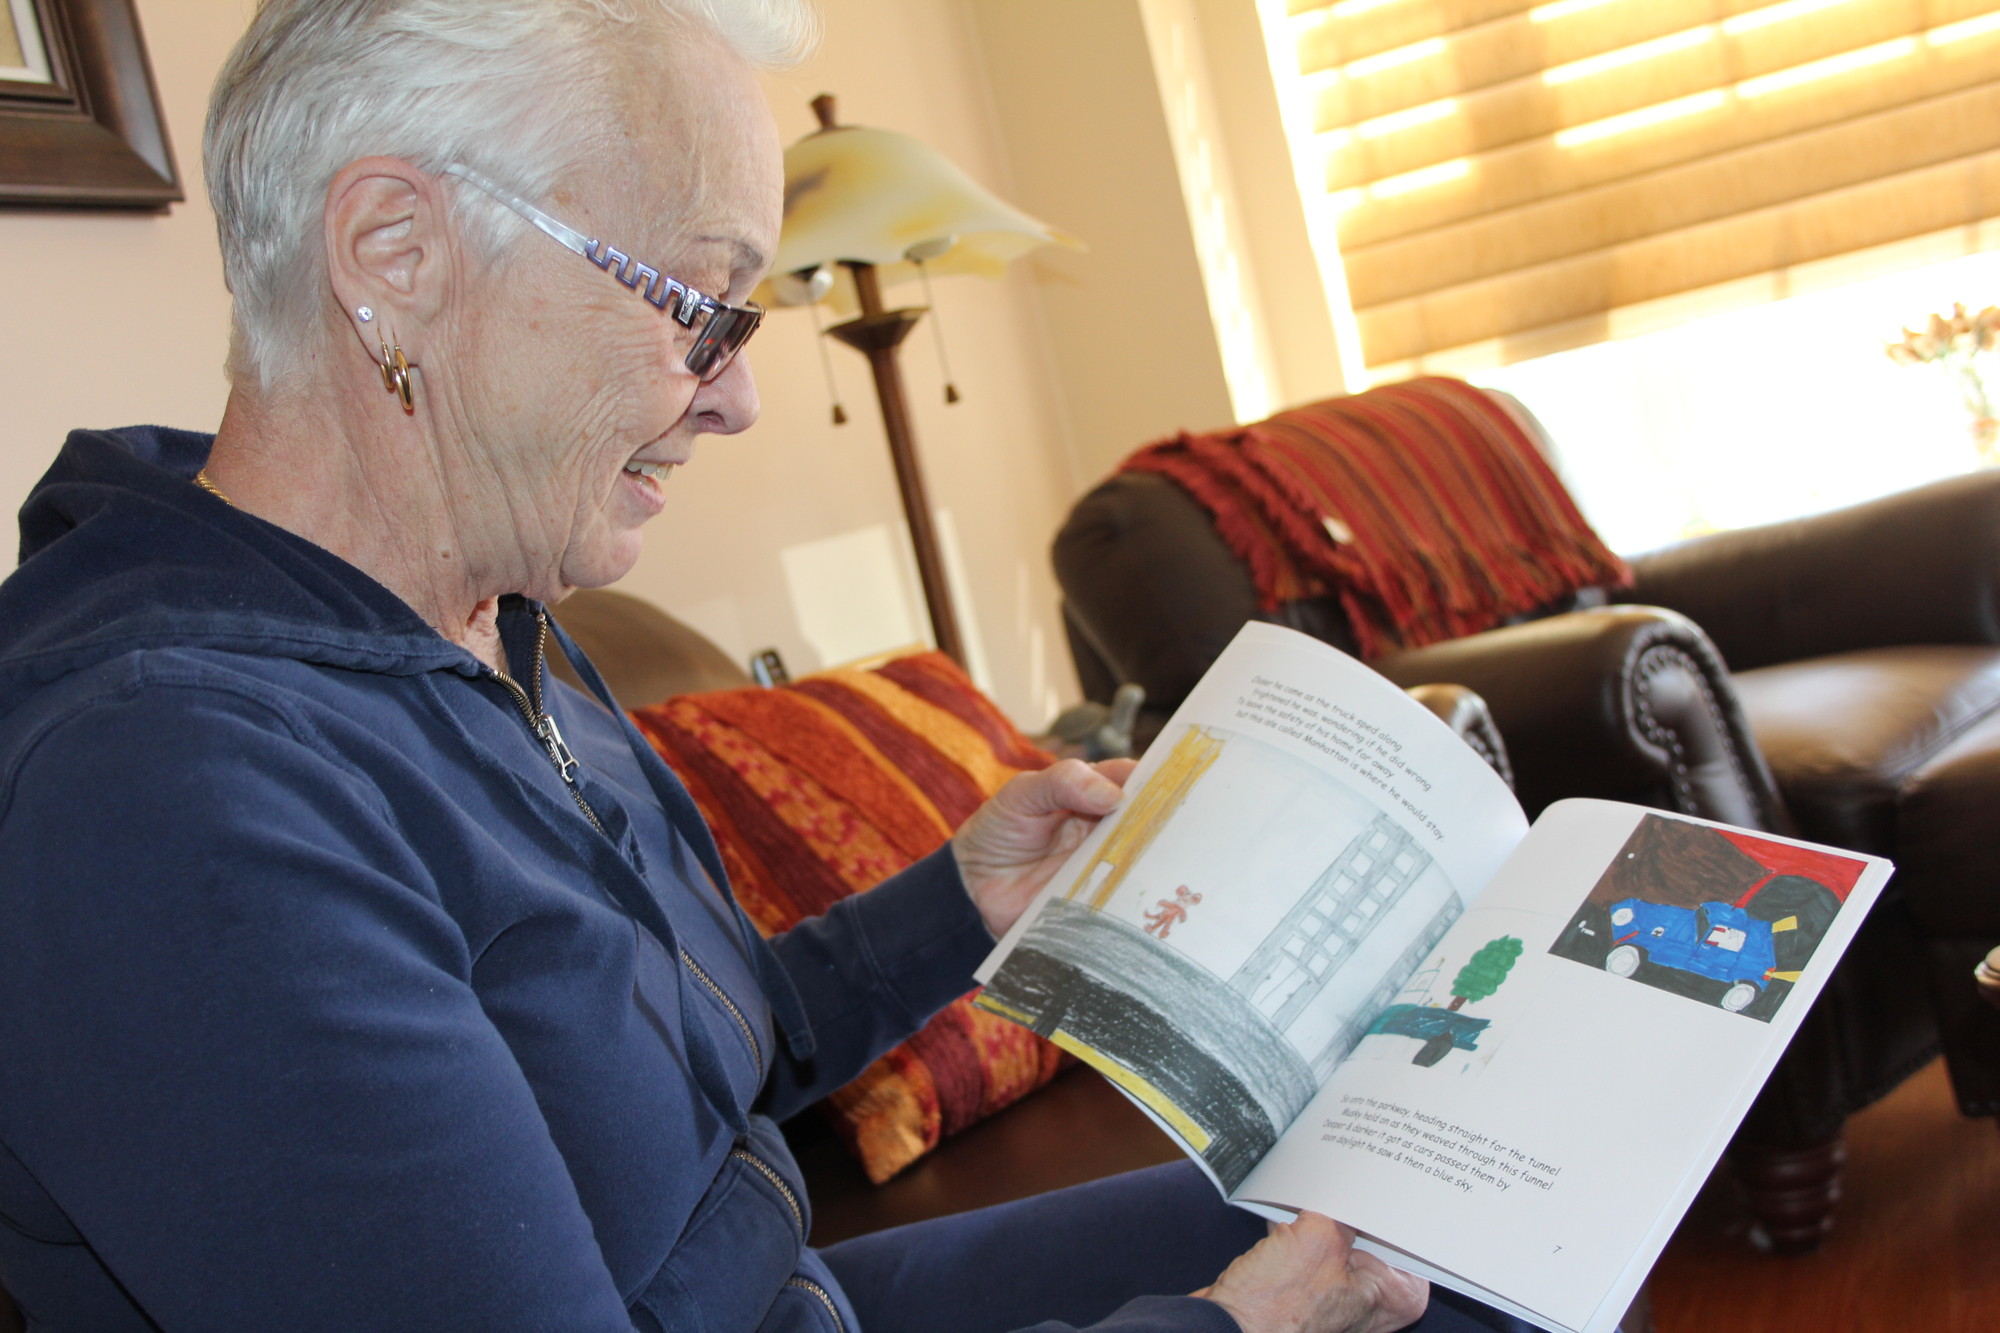 Susanne Giuliani, 68, a resident at the Seasons at East Meadow, published a children’s book, “Musky,” featuring illustrations by Oceanside elementary students.